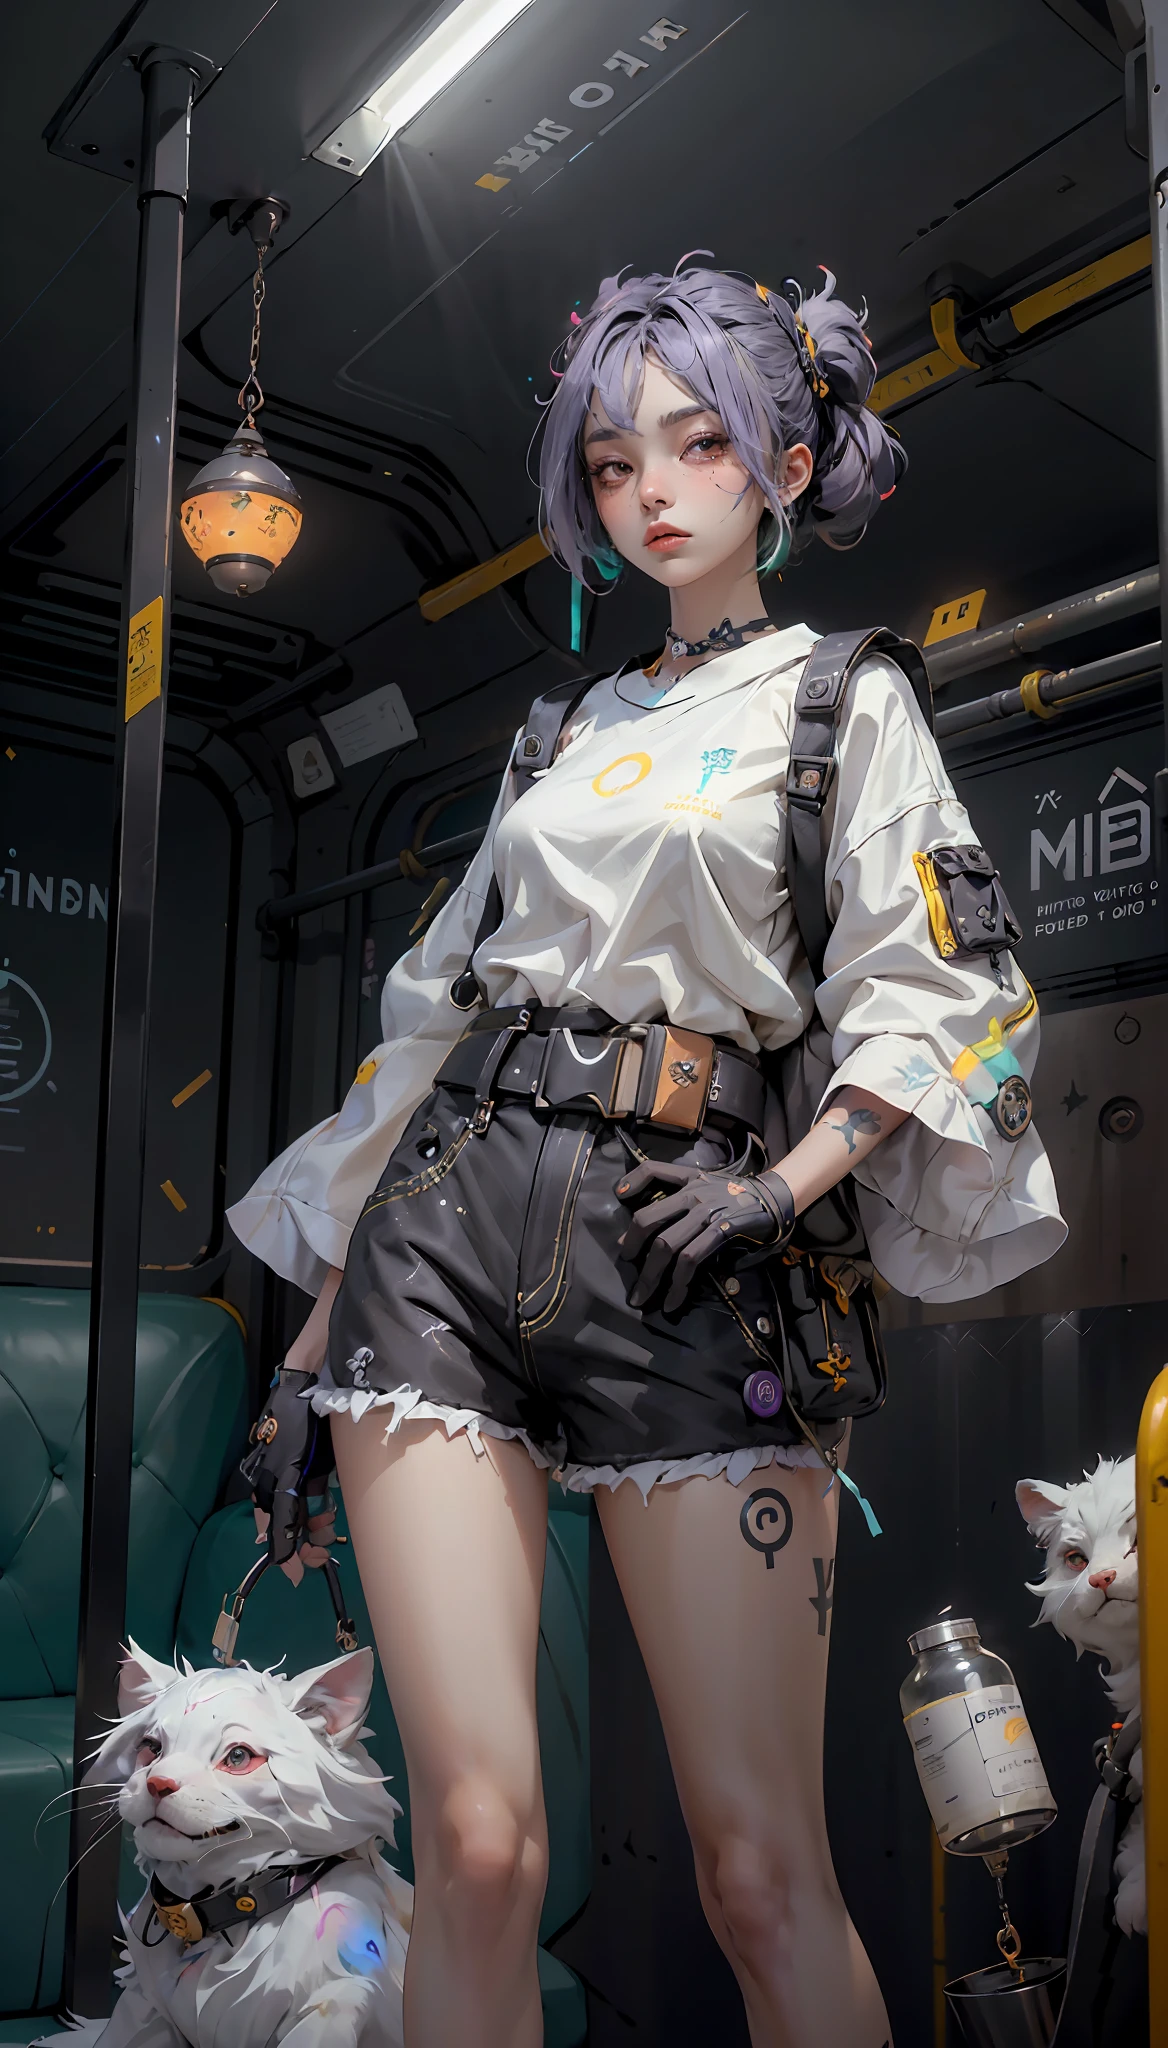 a foreboding scene, maiden with an open kimono and a old stretched white tshirt underneath, she has bioluminescent purple tattoos on her skin, bangs, black shorts, holding a flask with a magical nebula trapped inside, c, standing in a subway car, alchemy gadgets hanging from belt, cyberpunk, dystopian, blade runner`